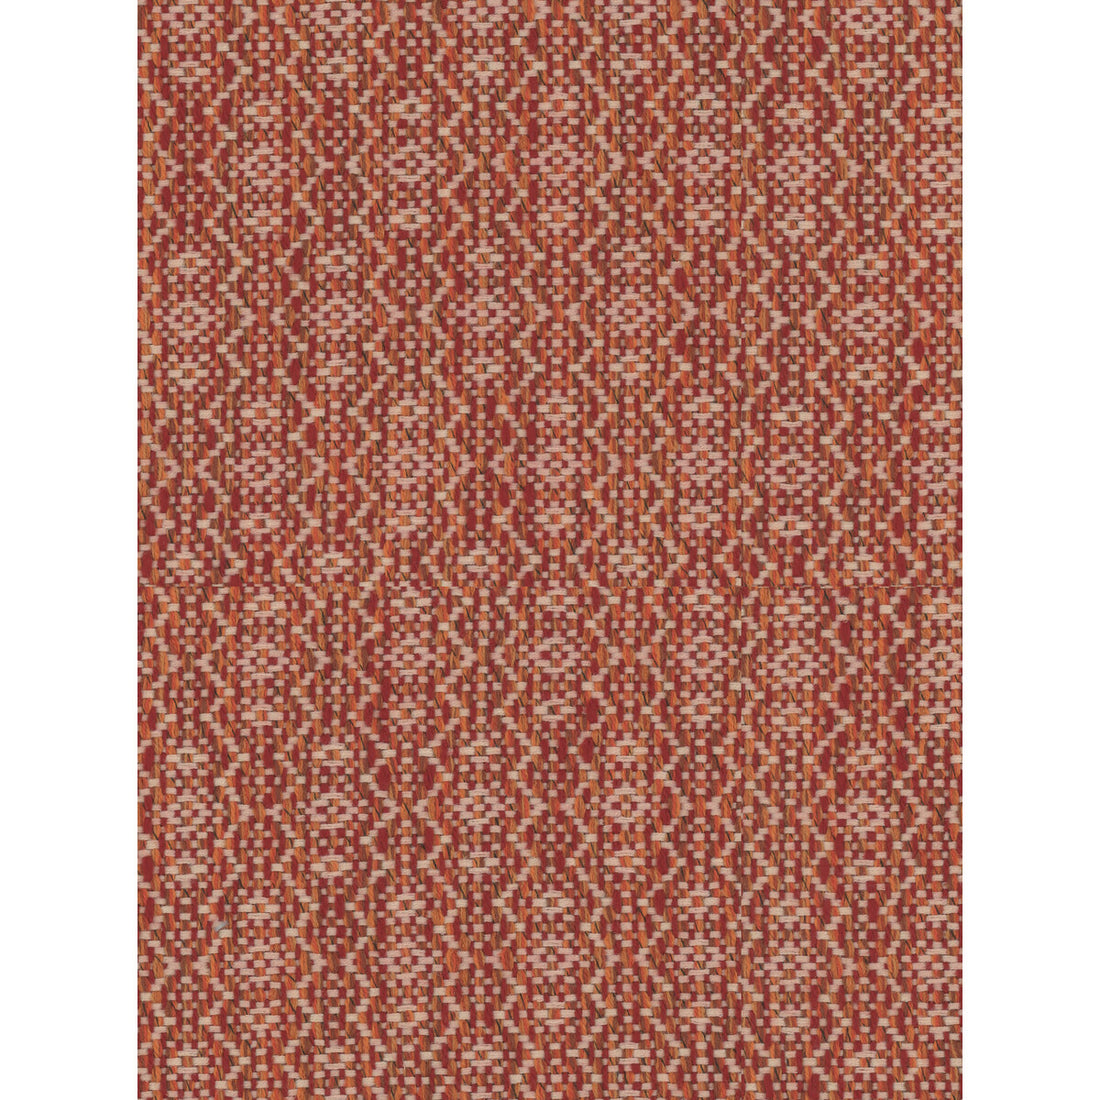 Kravet Smart fabric in 34625-912 color - pattern 34625.912.0 - by Kravet Smart in the Performance Crypton Home collection